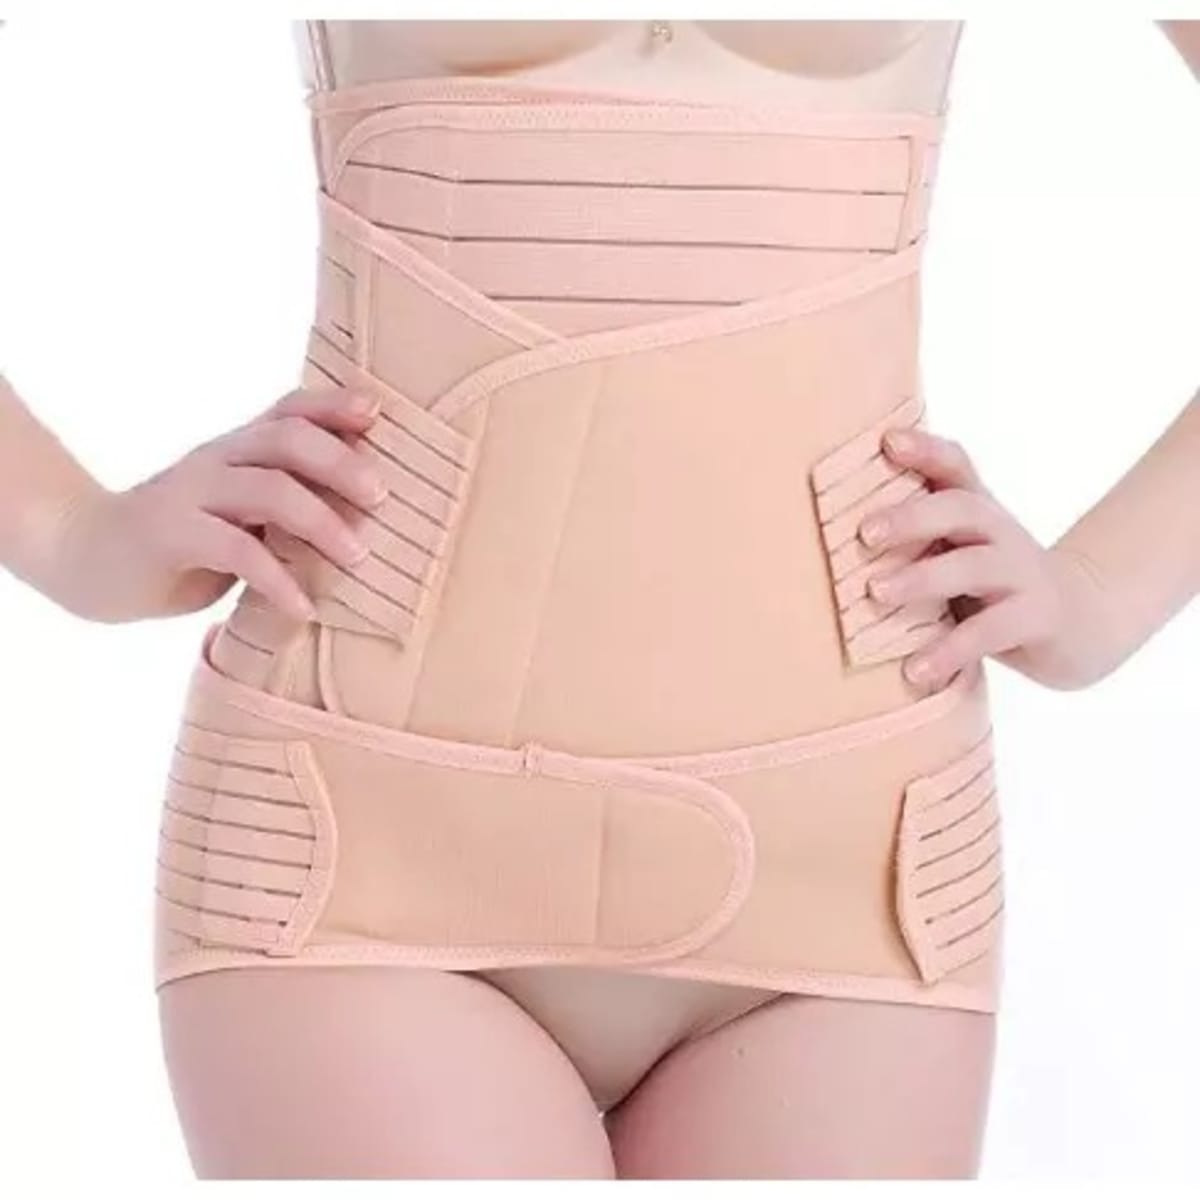 Support Recover Girdle 3 In 1 Belly Waist Pelvis Trainer Control